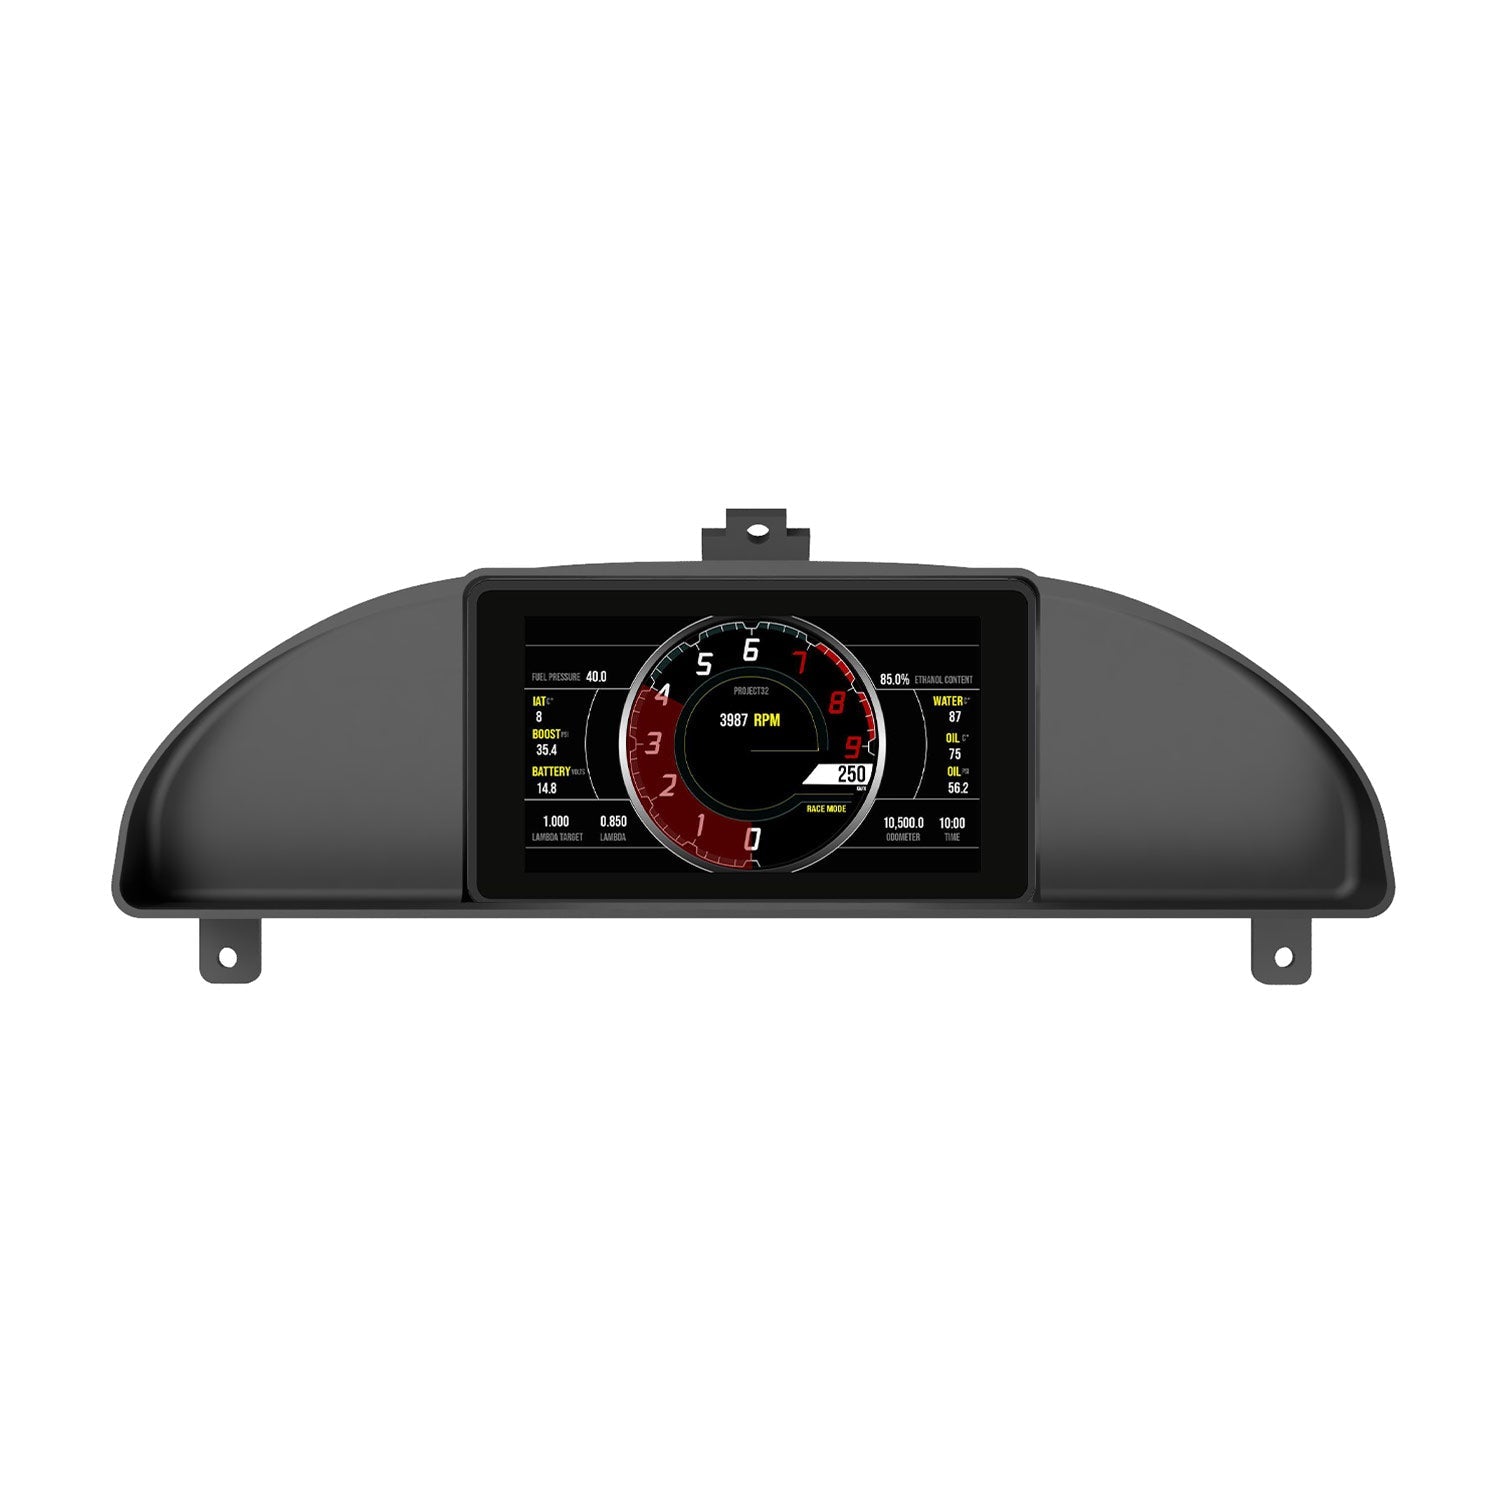 Nissan Silvia S13 180SX/200SX/240SX 88-94 Recessed Dash Mount for the Powertune Digital Display (display not included)